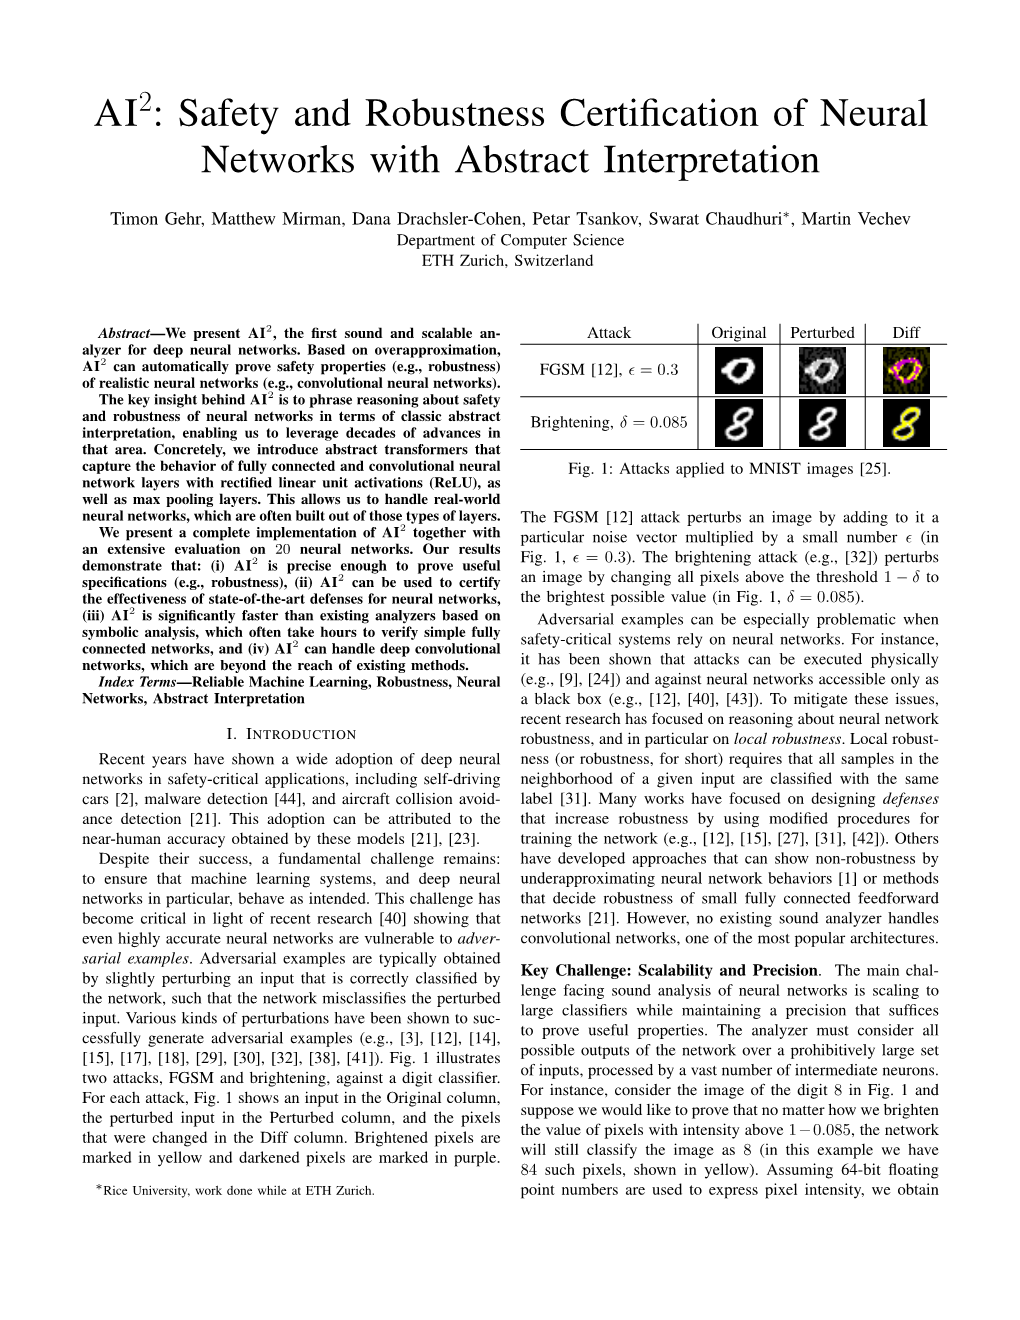 Safety and Robustness Certification of Neural Networks with Abstract